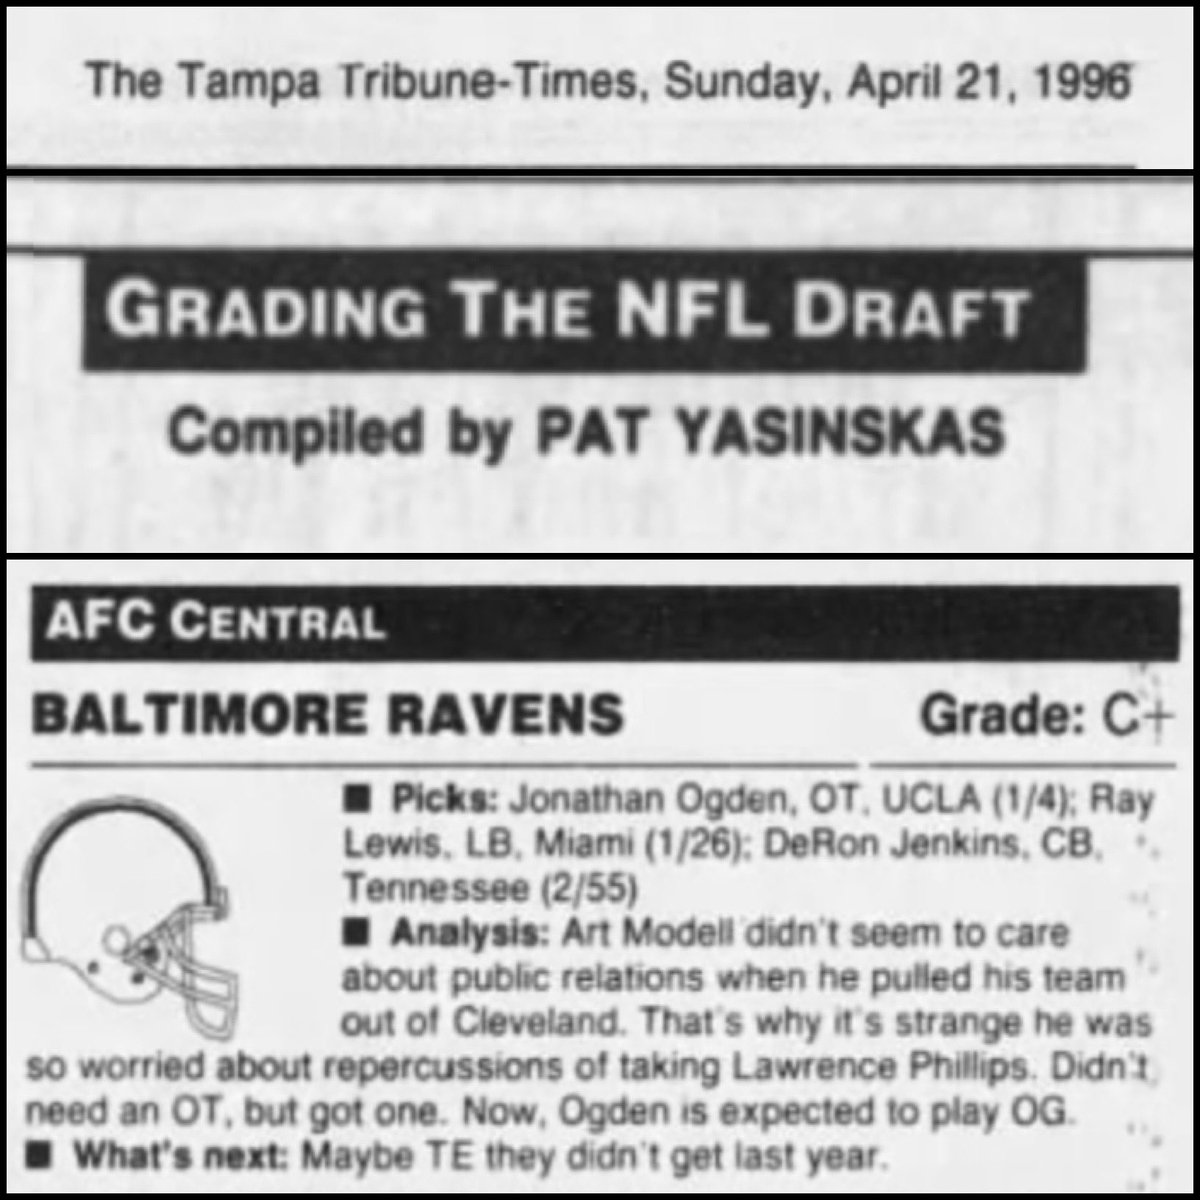 1996 Ravens Draft (Jonathan Ogden & Ray Lewis 1st round)There were a few people who gave Baltimore a grade on the “C” line, including Len Pasquarelli who really thought the Ravens should have picked Lawrence Phillips number 4 overall instead of Ogden. https://www.google.com/amp/amp.thecomeback.com/freezingcoldtakes/nfl/1996-len-pasquarelli-gives-ravens-bad-grade-drafting-jonathan-ogden-ray-lewis.html